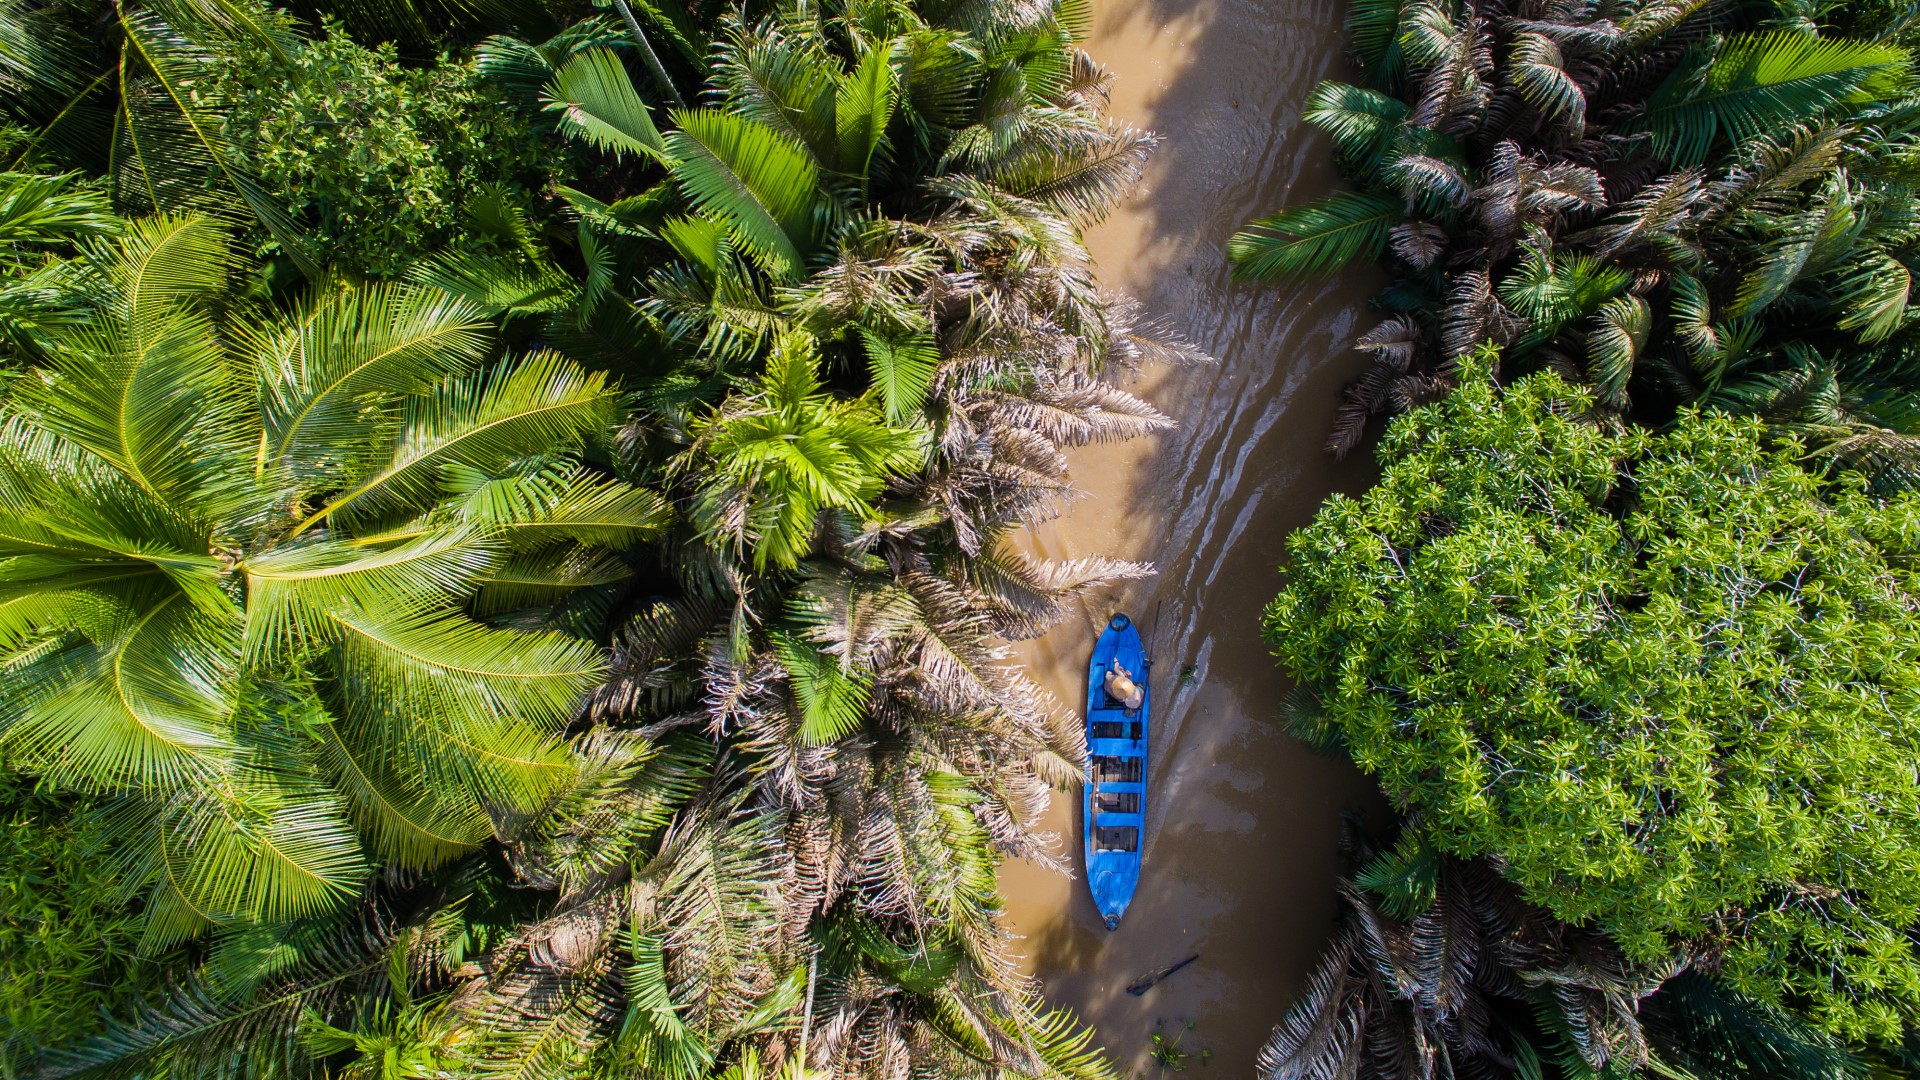 a person in a boat in a river surrounded by trees